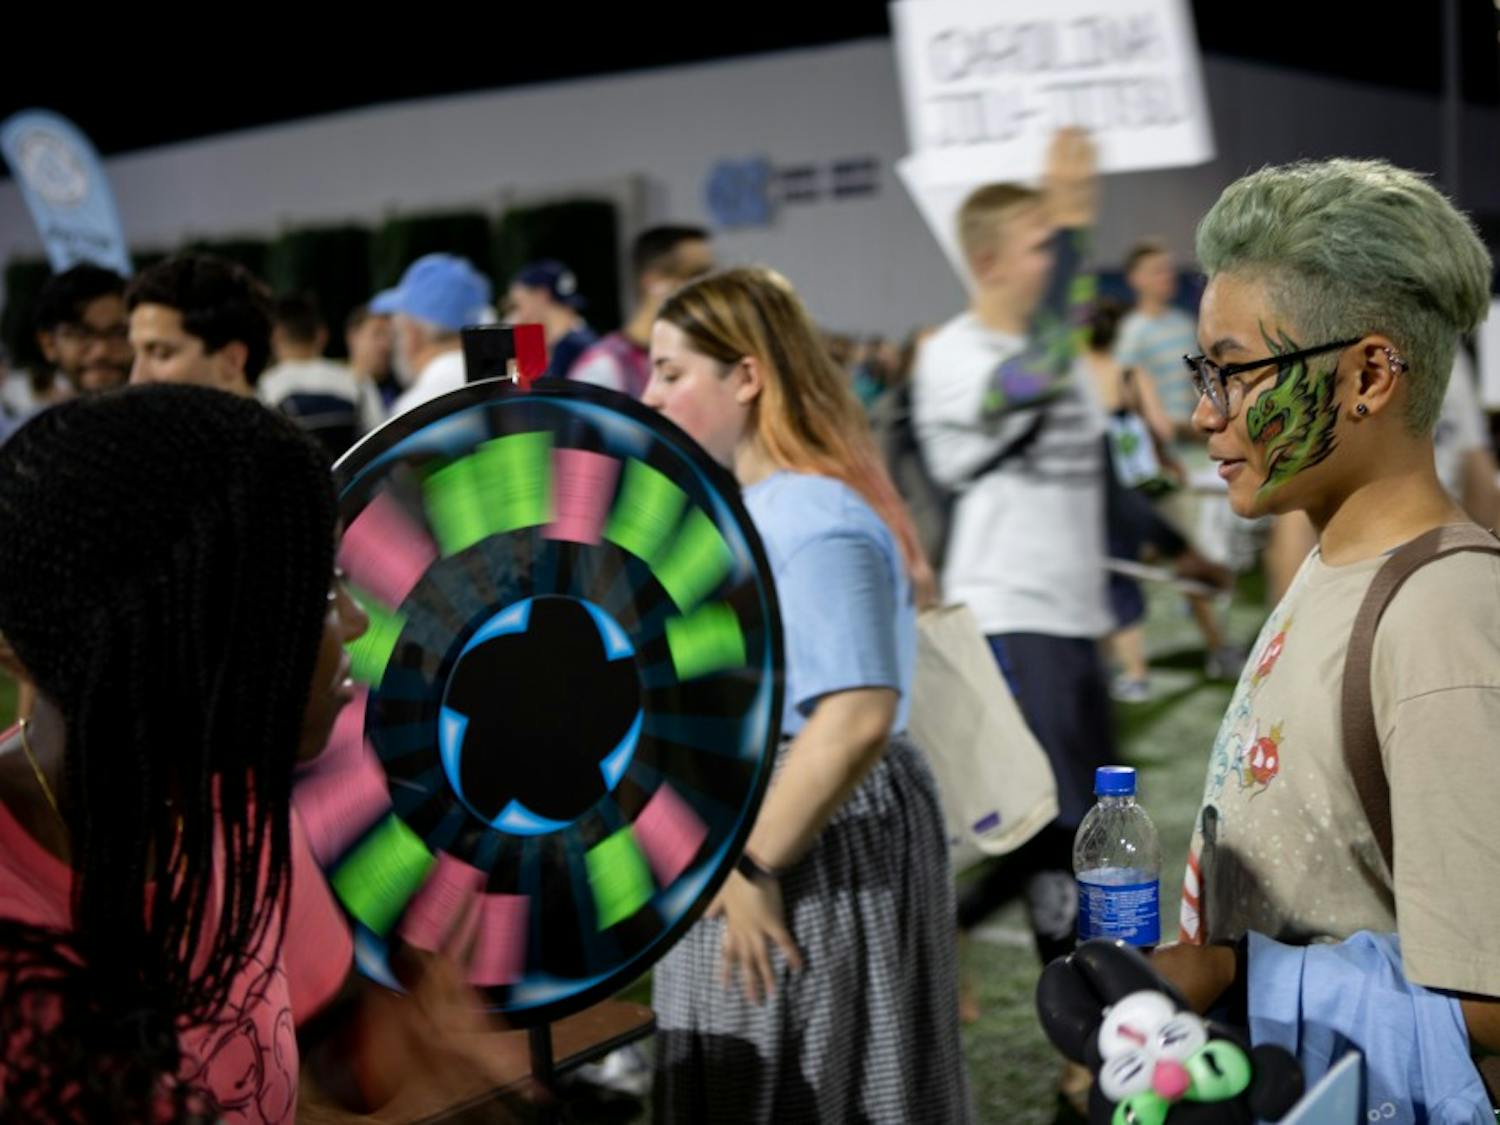 Jade Hampton, a senior information and library science major, spins a wheel for a prize during Fallfest on Hooker Fields on the evening of Sunday, August 18 2019.